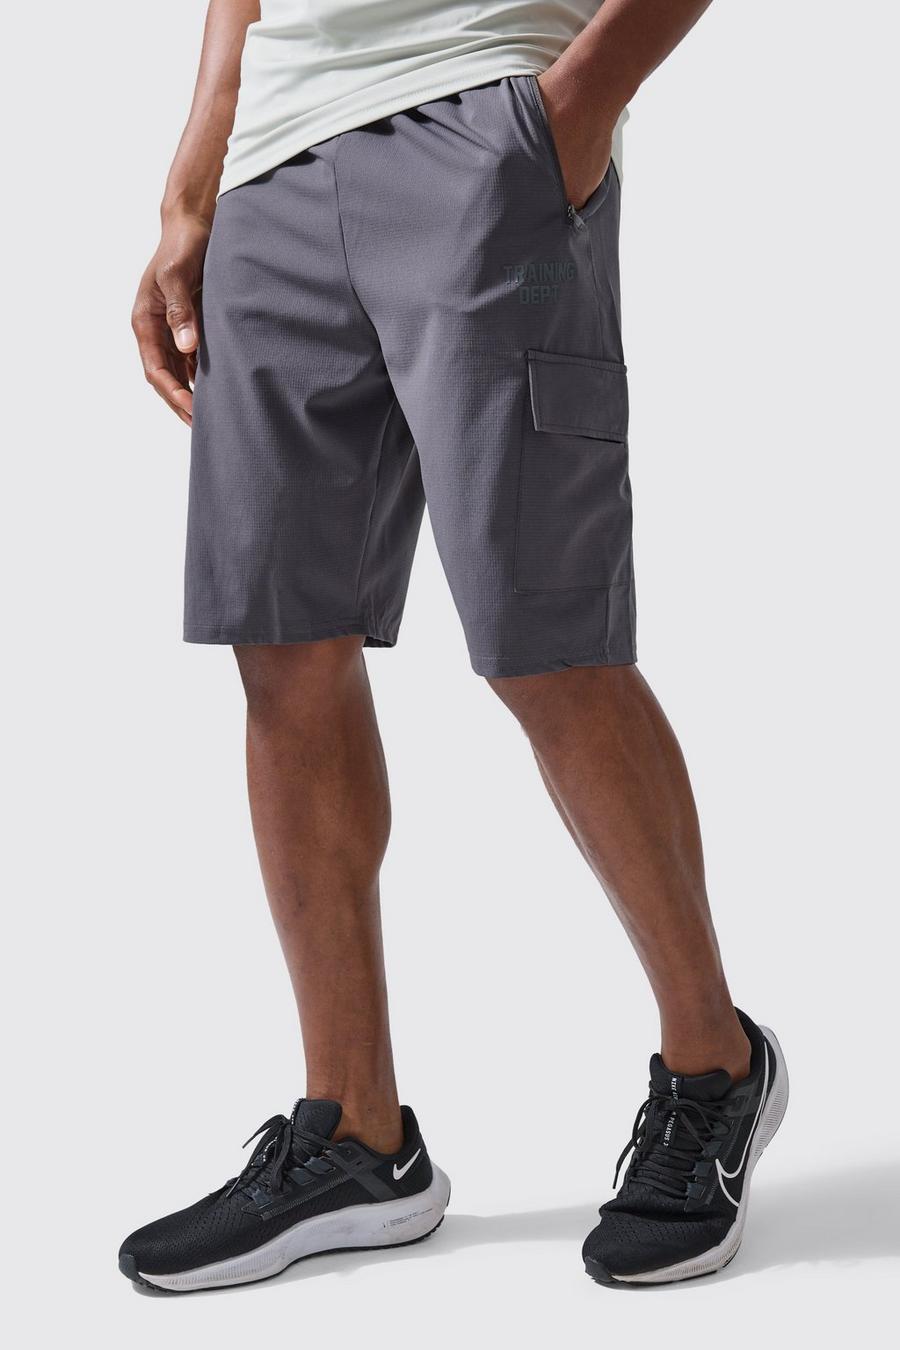 Charcoal Tall Active Training Dept Cargoshorts image number 1